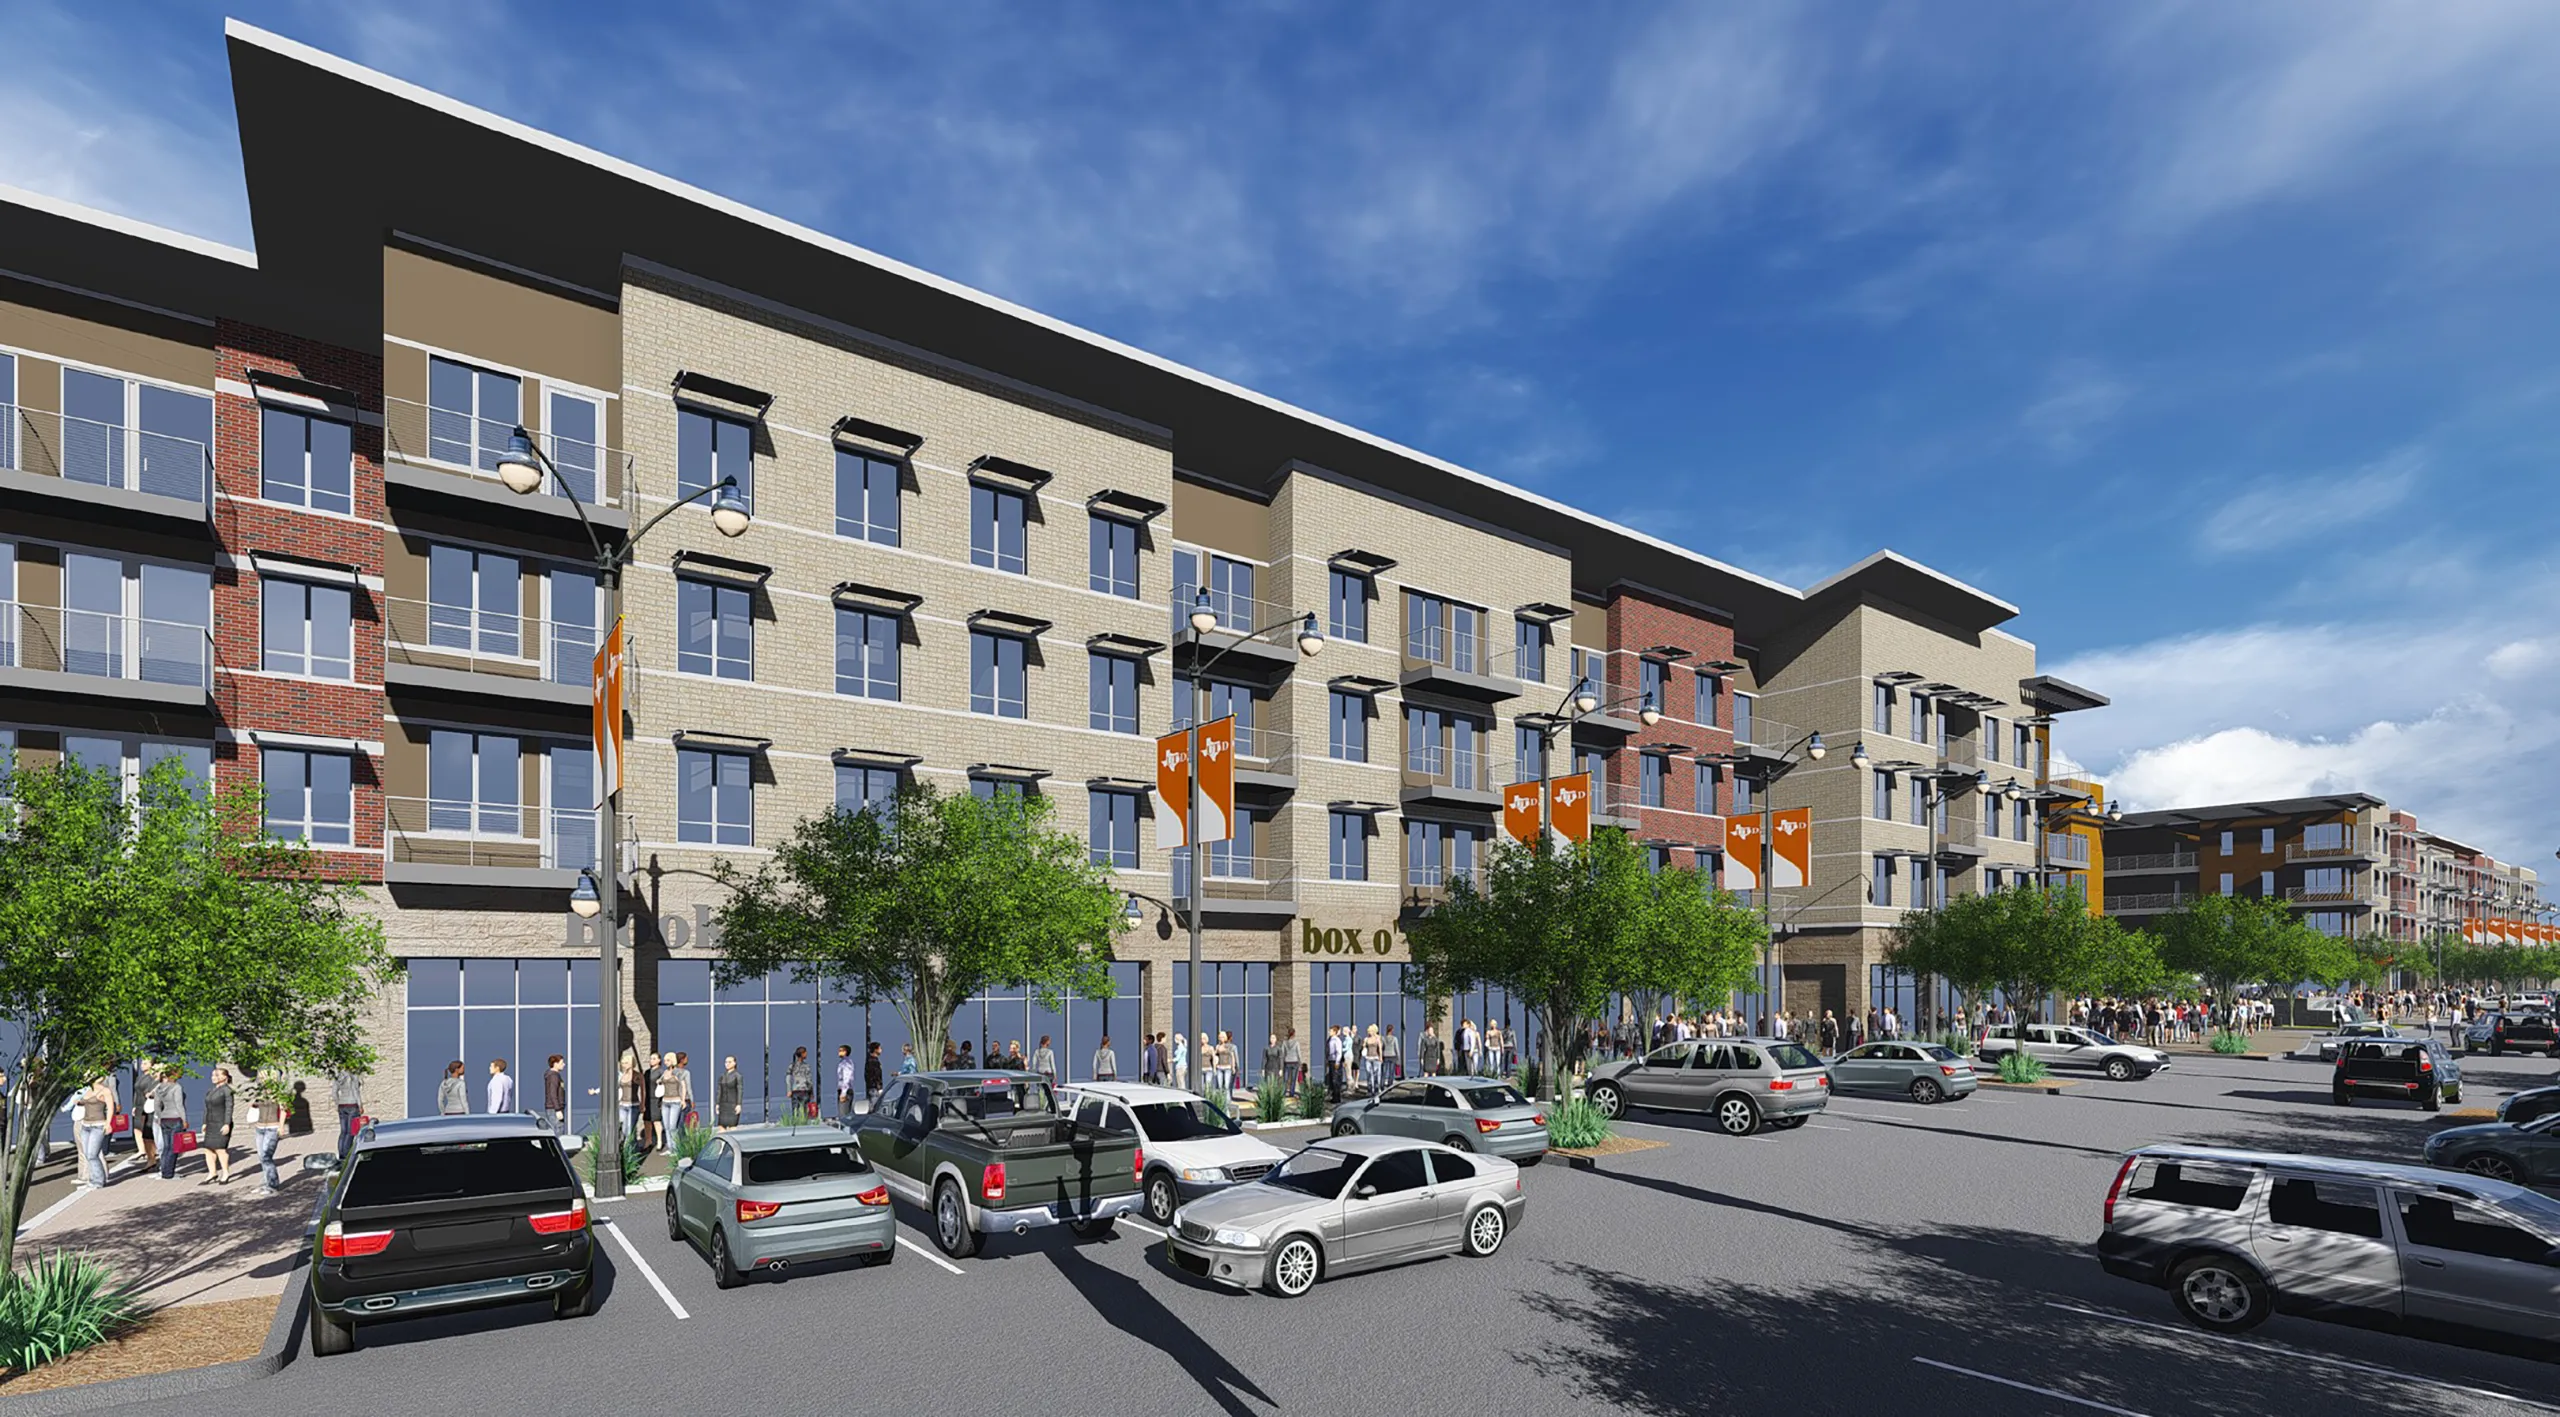 student accommodation investments - University of Texas at Dallas